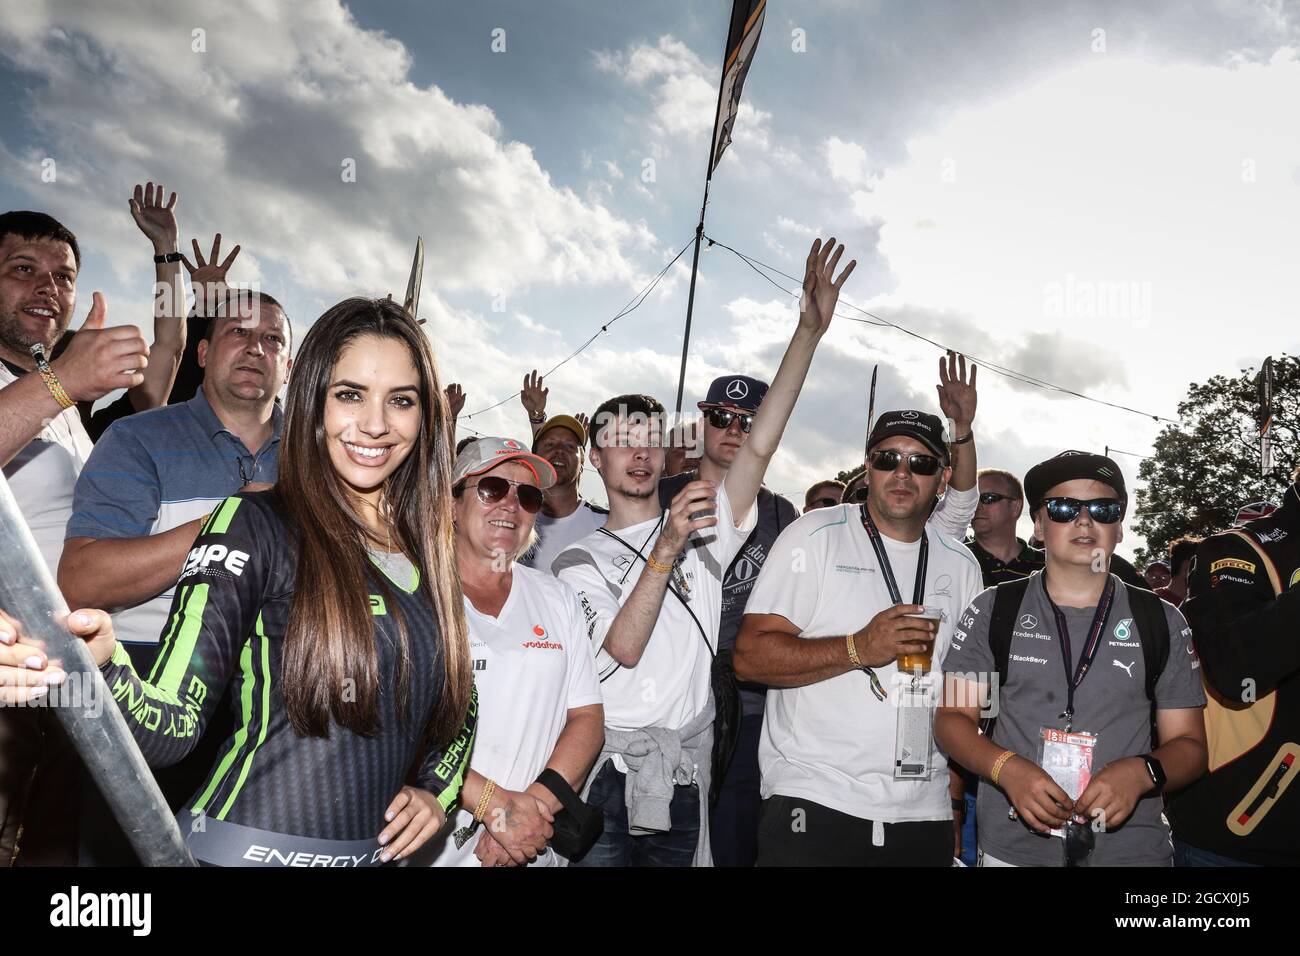 Sahara Force India F1 Team Fan Zone at Woodlands Campsite. British Grand Prix, Friday 8th July 2016. Silverstone, England. Stock Photo